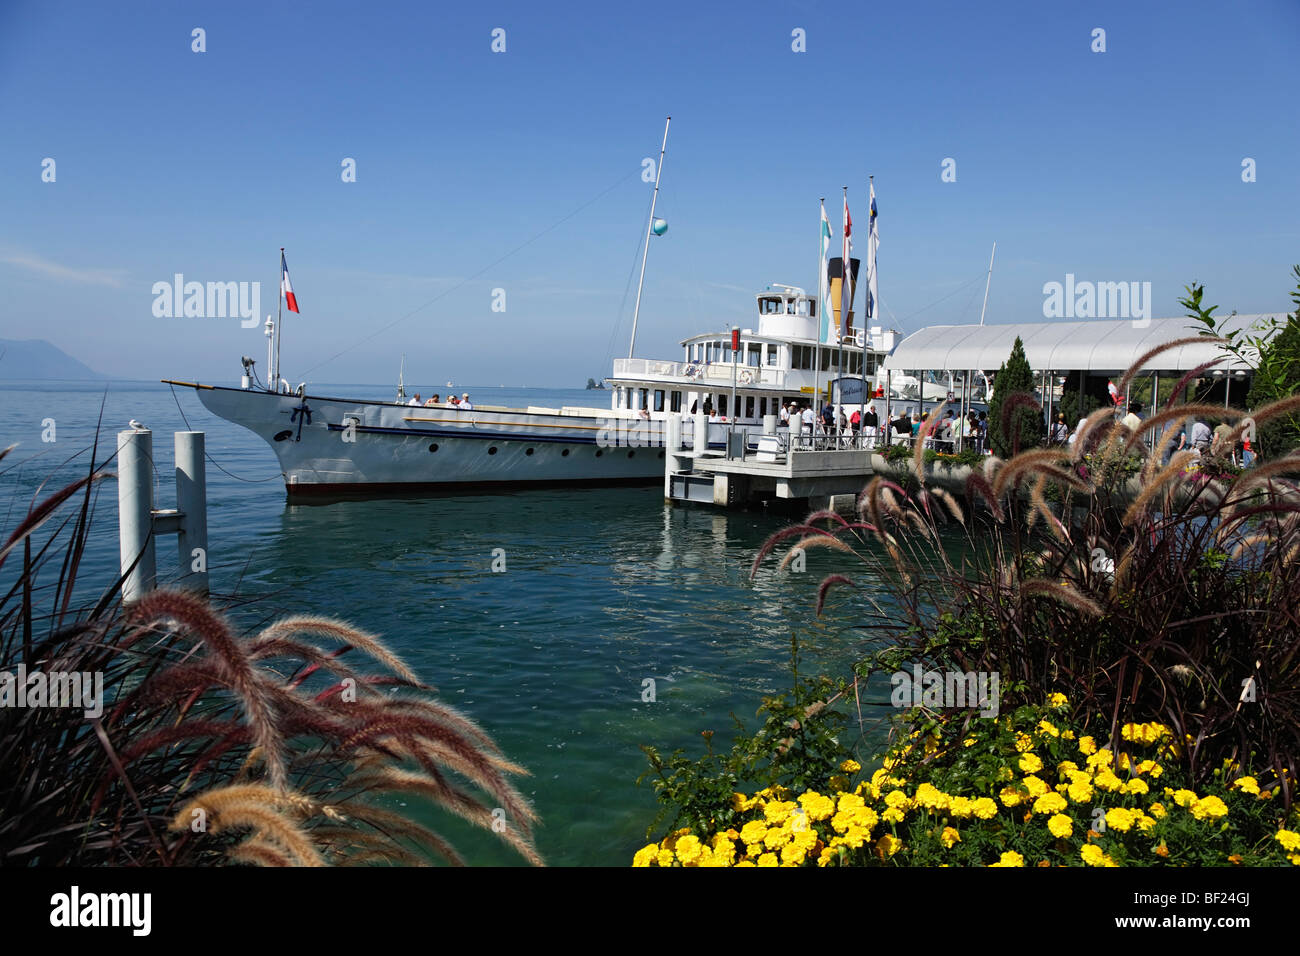 Excursion boat at jetty, Montreux, Canton of Vaud, Switzerland Stock Photo